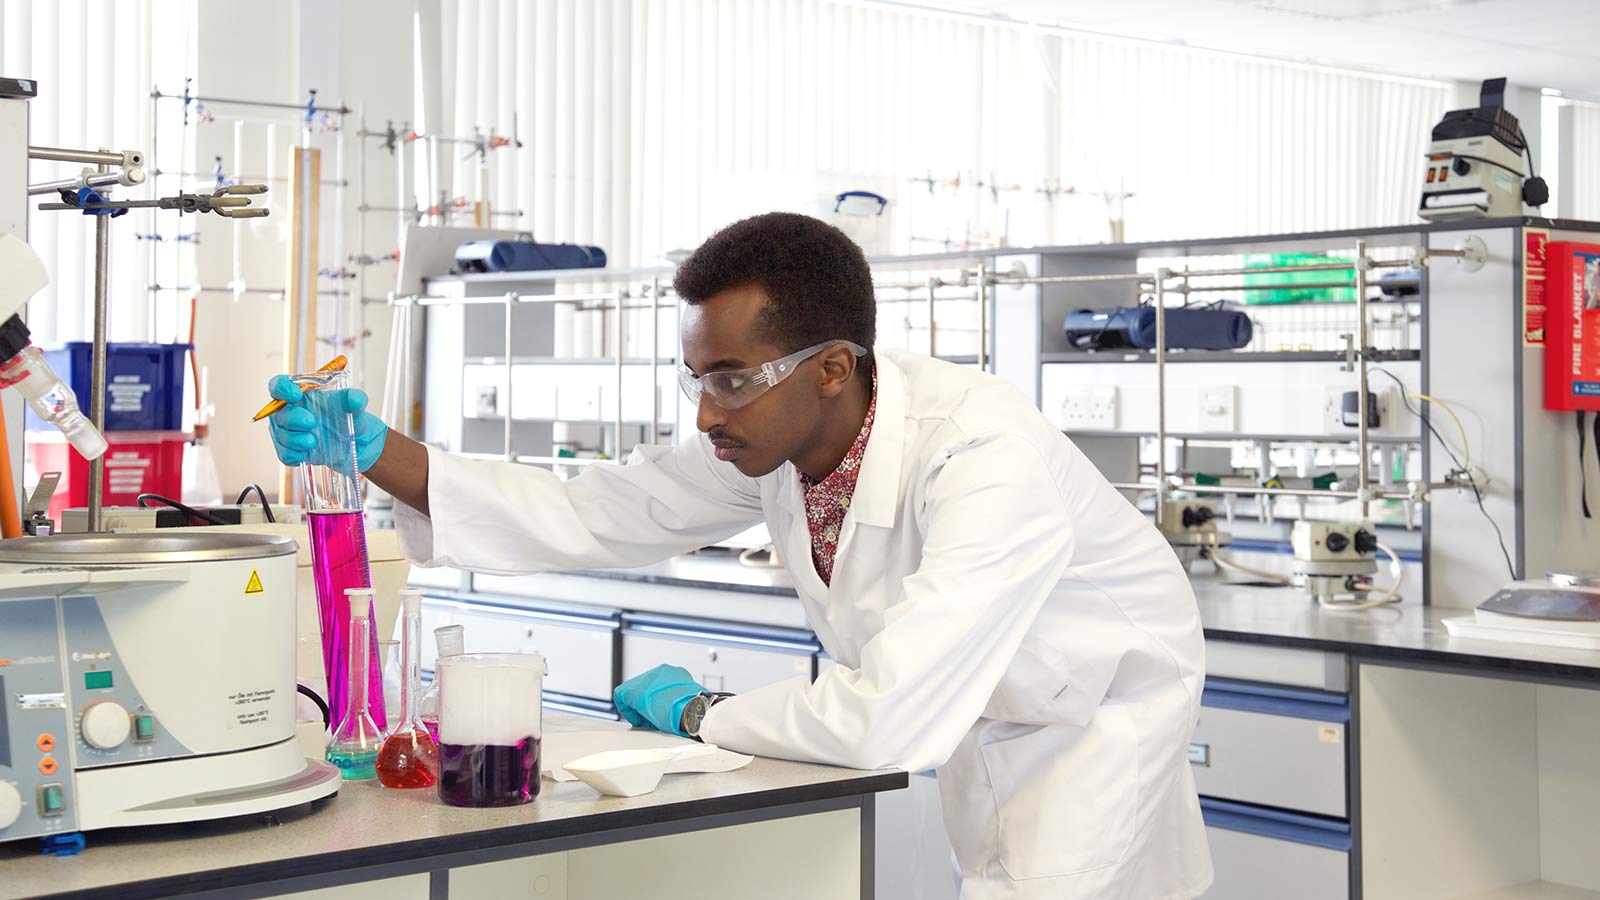 A University of Sussex student in a science lab